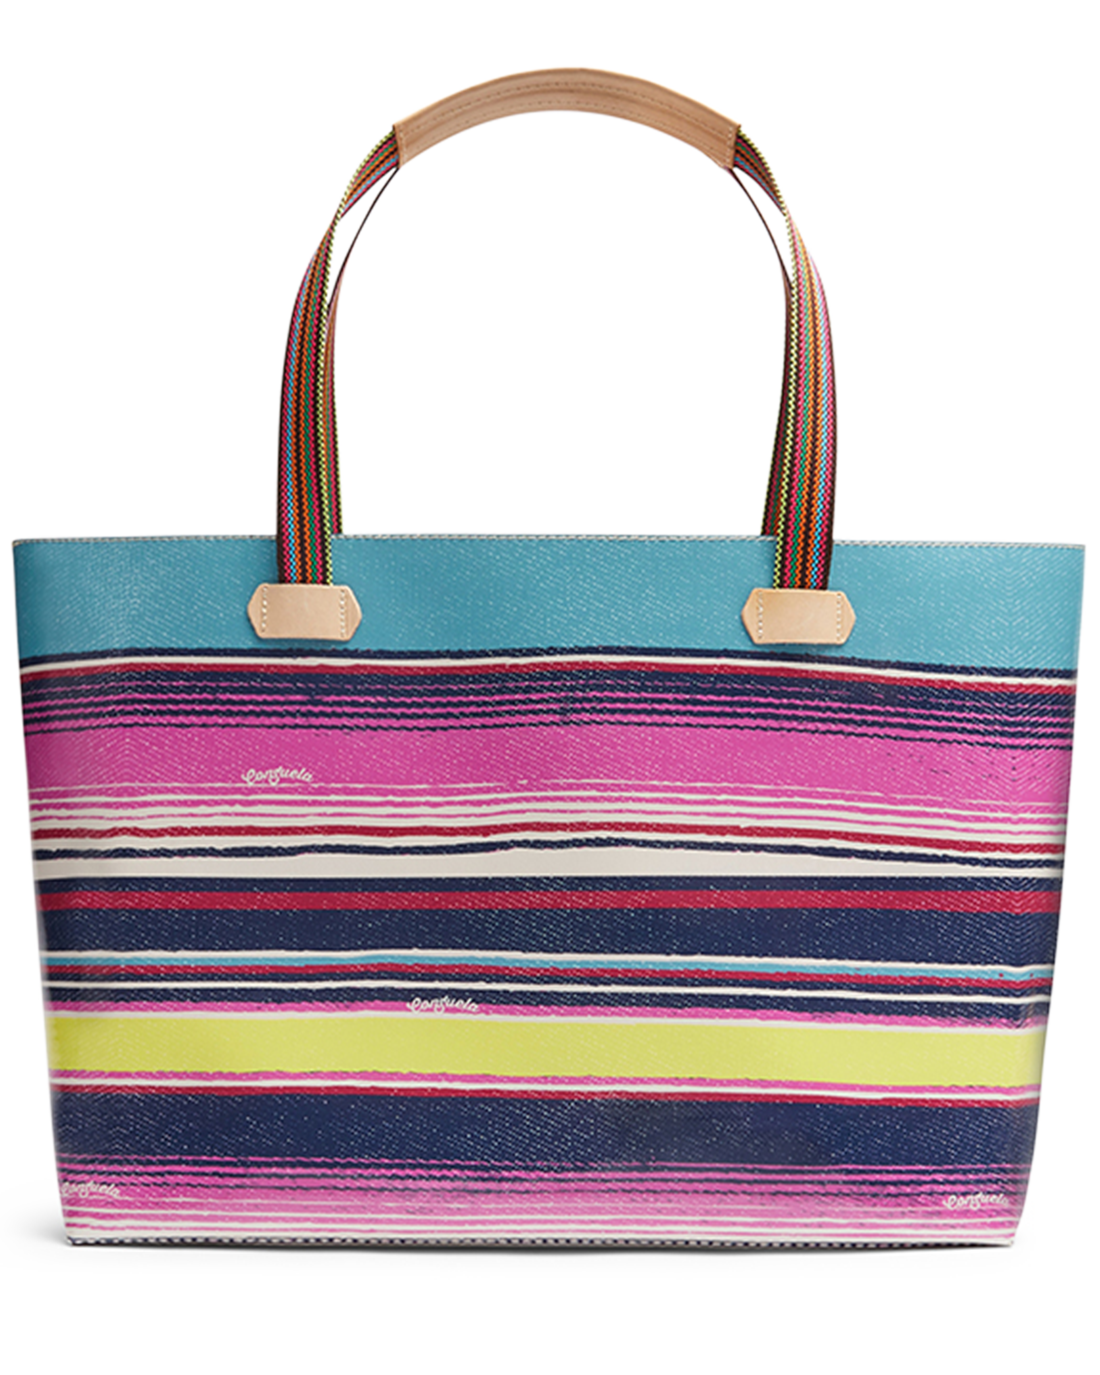 Thelma Big Breezy East/West Tote